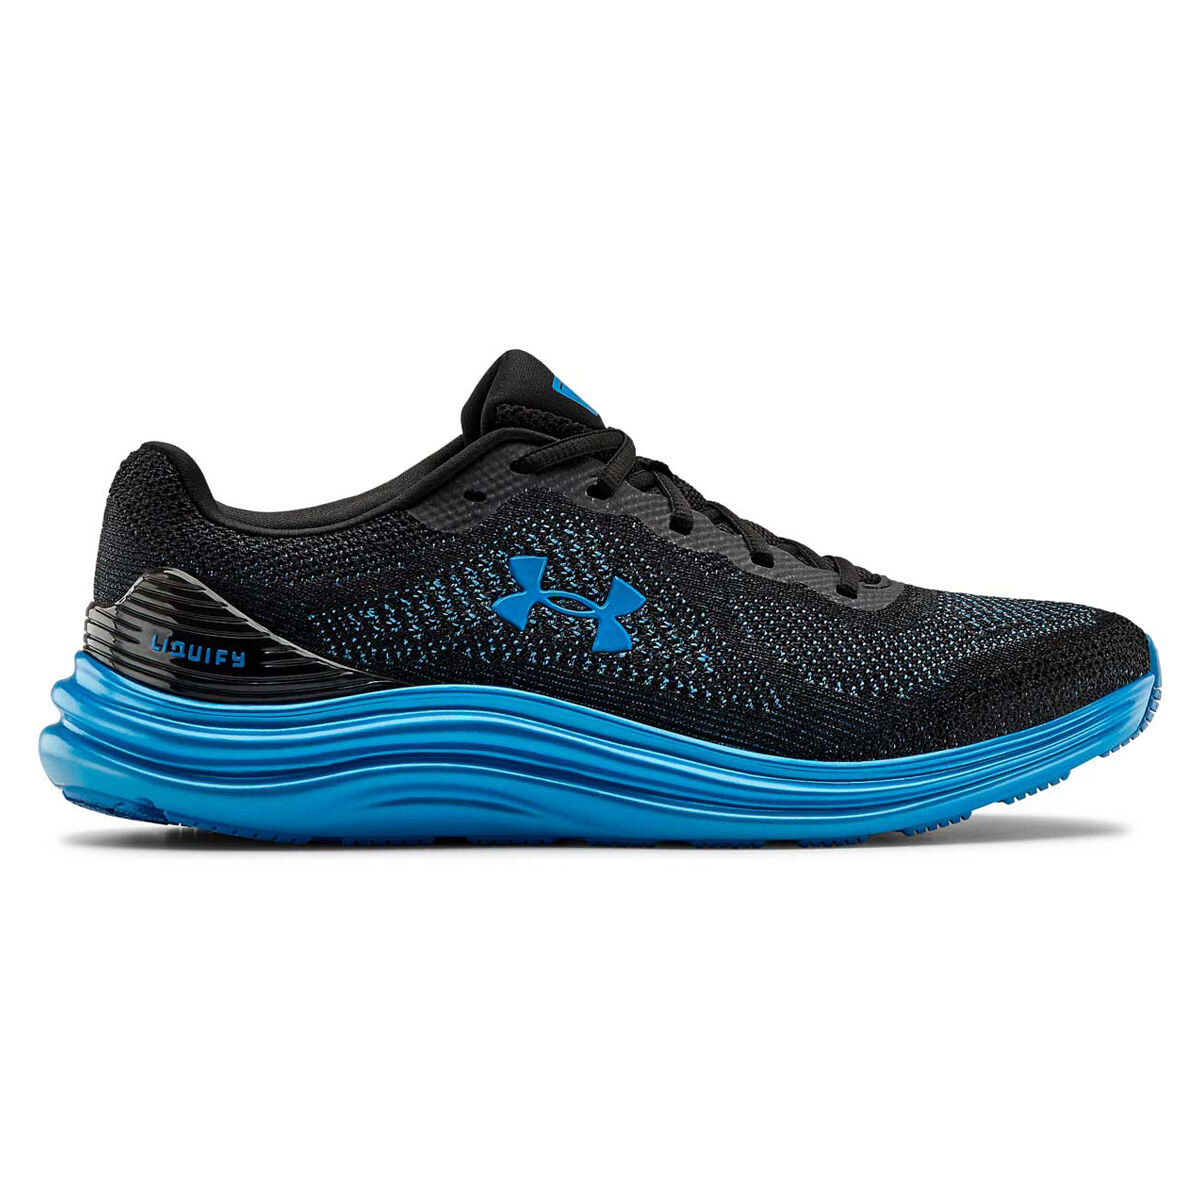 Under Armour Liquify Mens Running Shoes 